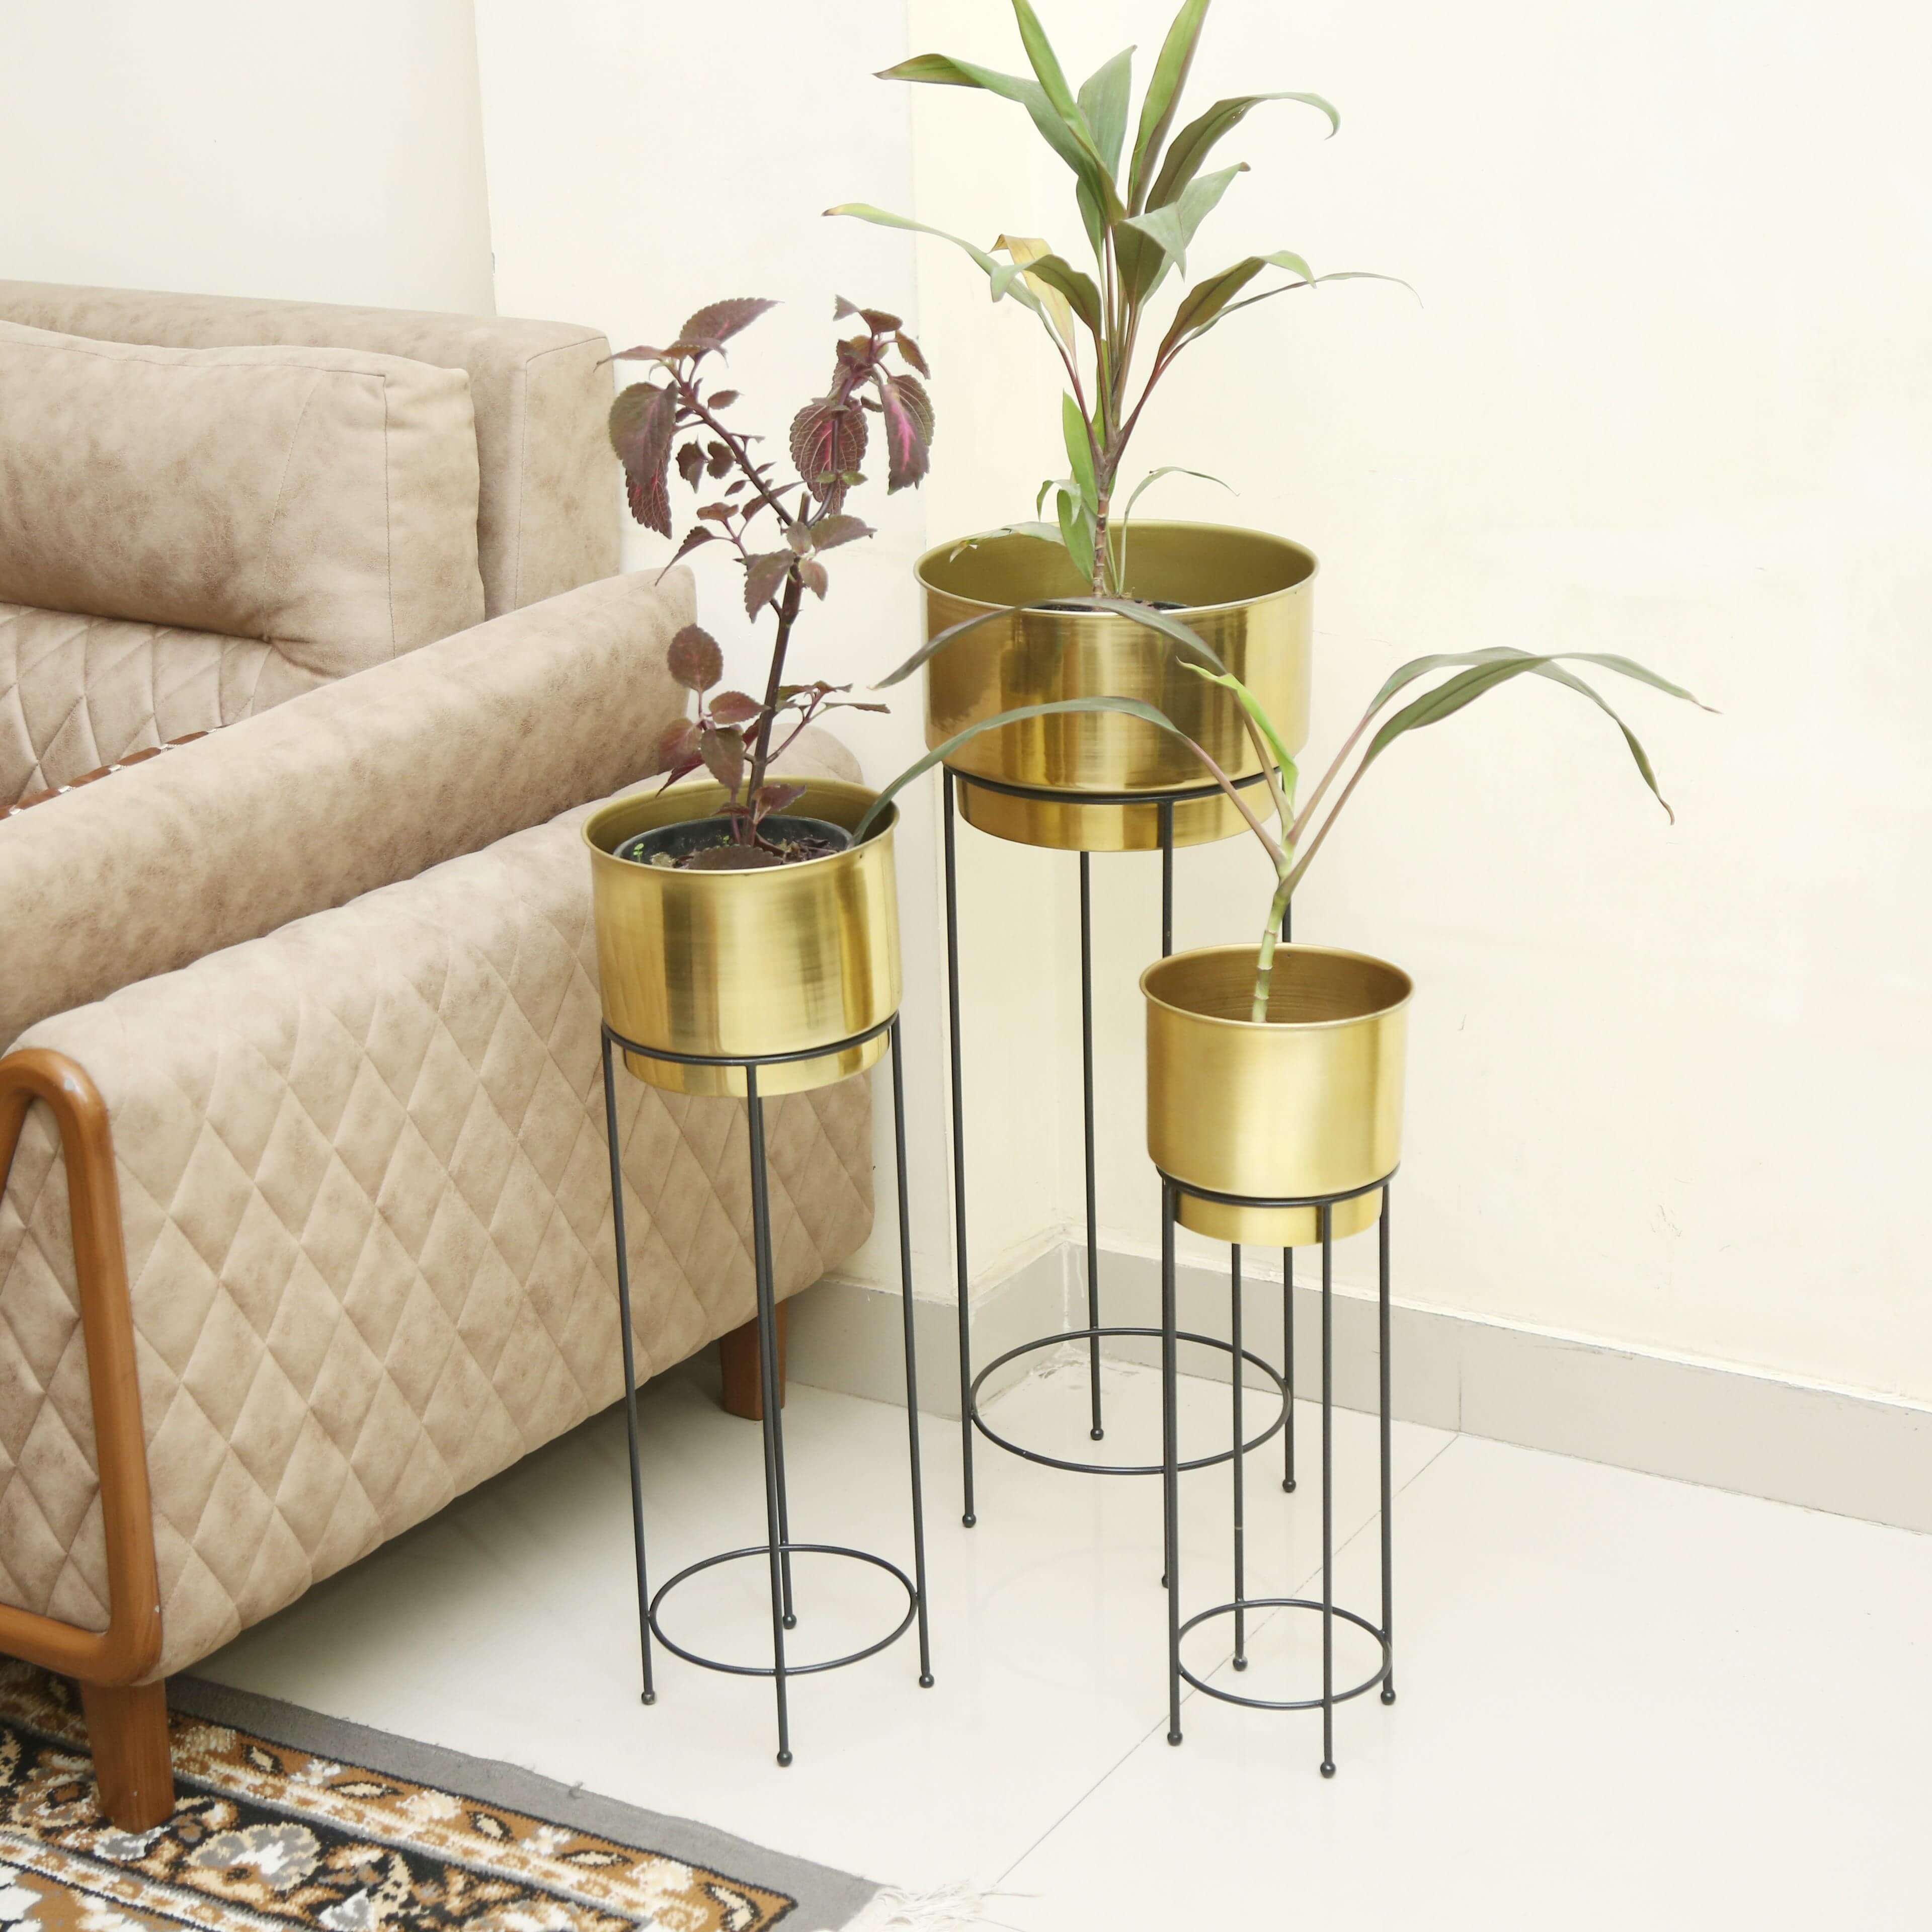 Trust Basket Create Planter Set of 3 (Gold)|With Premium Strong Durable Stand for Living Room